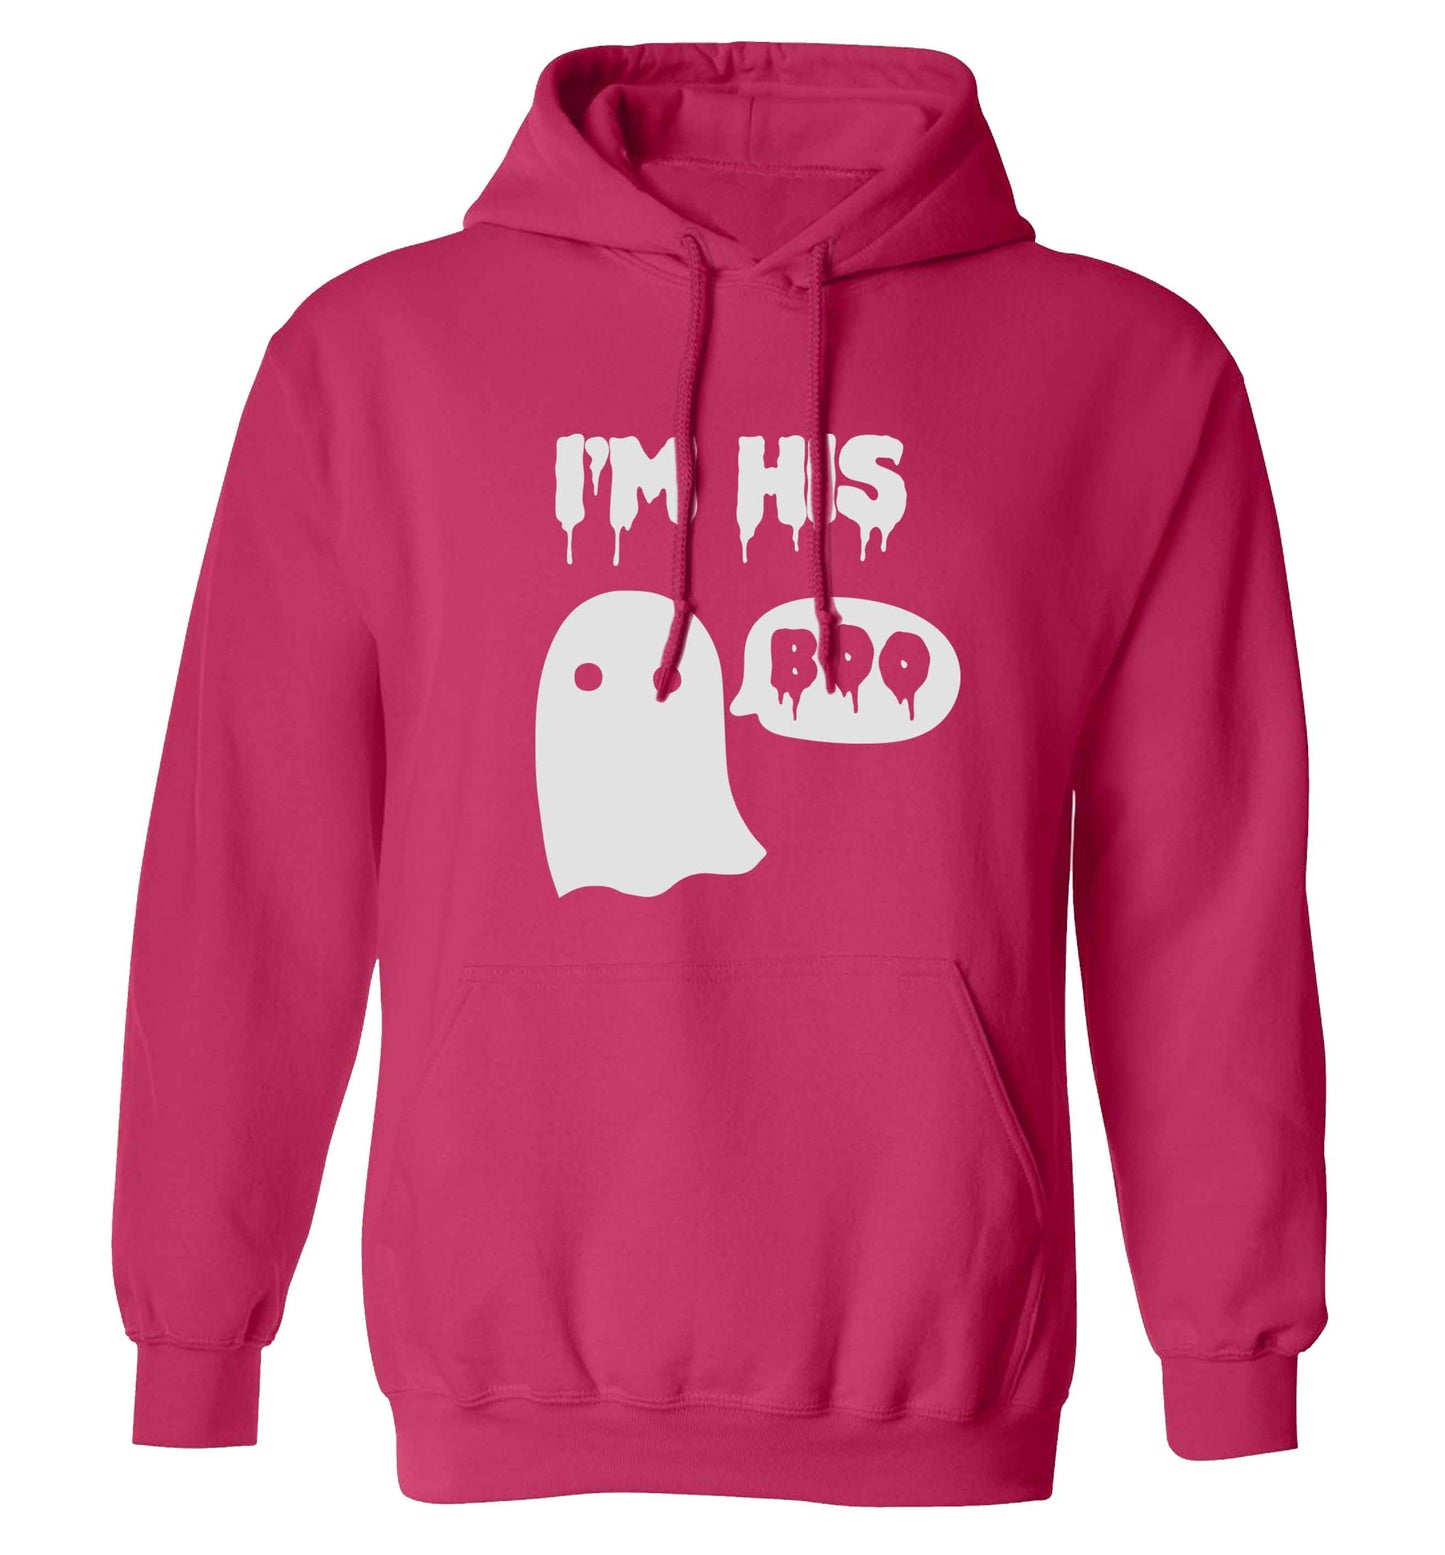 I'm his boo adults unisex pink hoodie 2XL